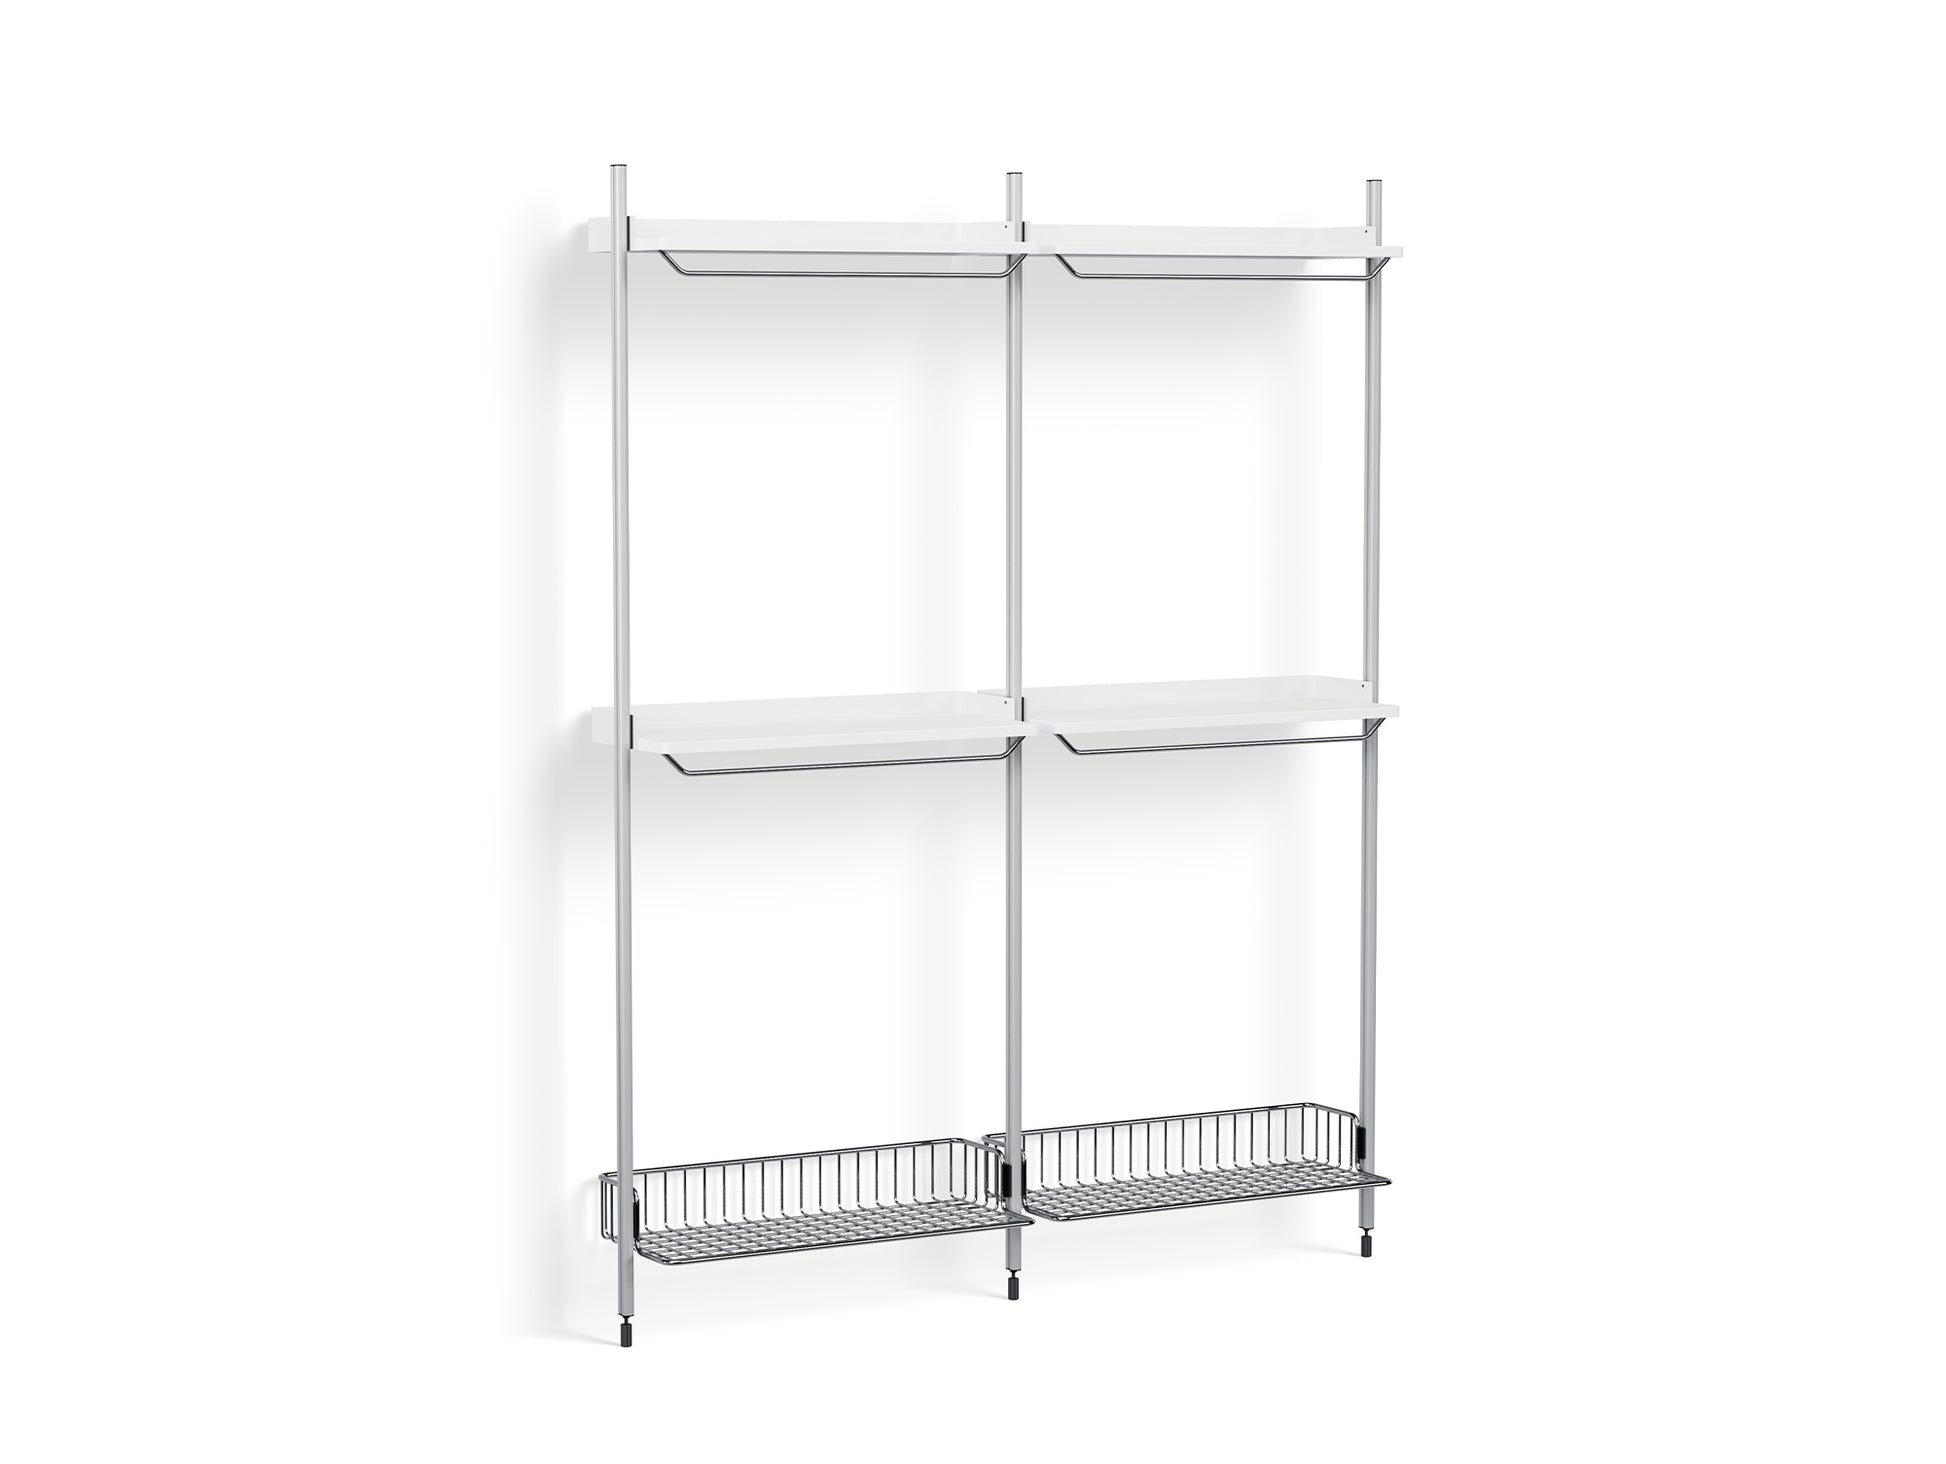 Pier System 1032 by HAY - Clear Anodised Aluminium Uprights / PS white with Chromed Wire Shelf